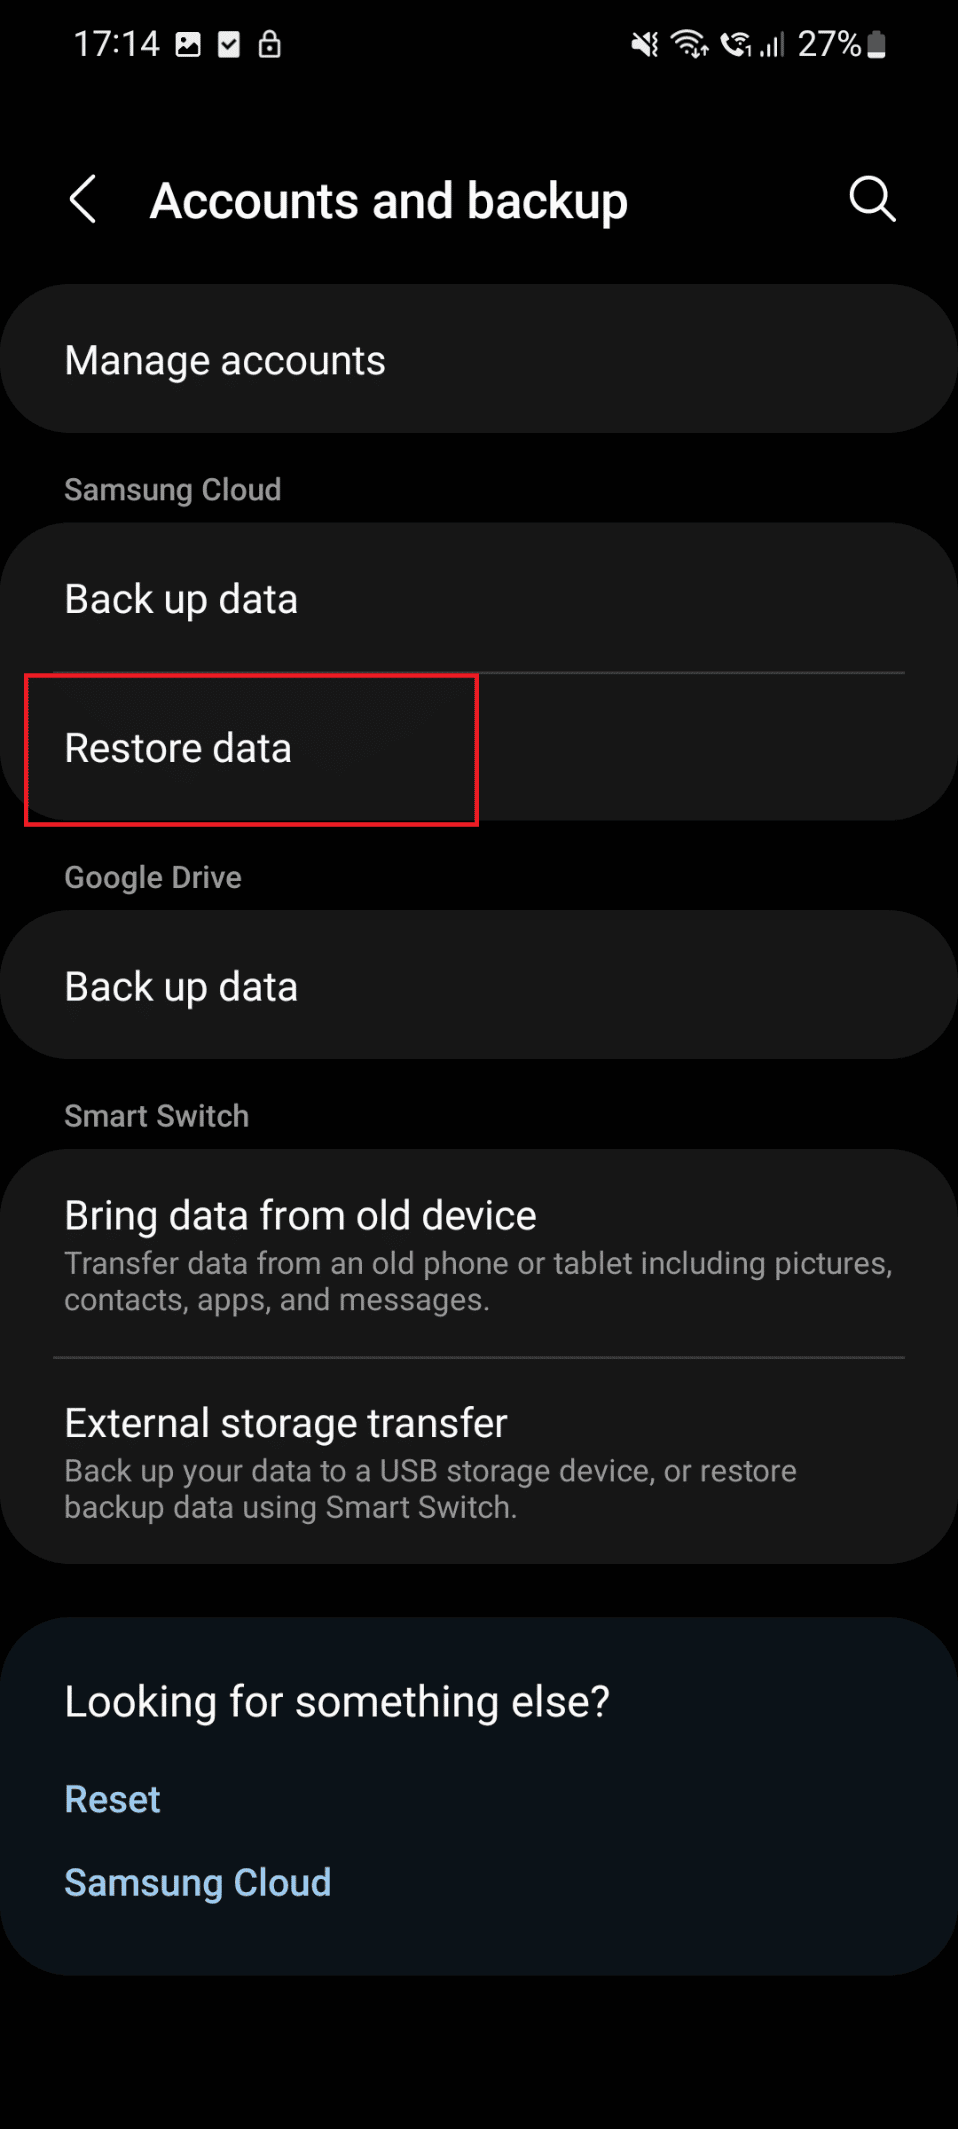 Tap on the Restore data option under the Samsung cloud option.